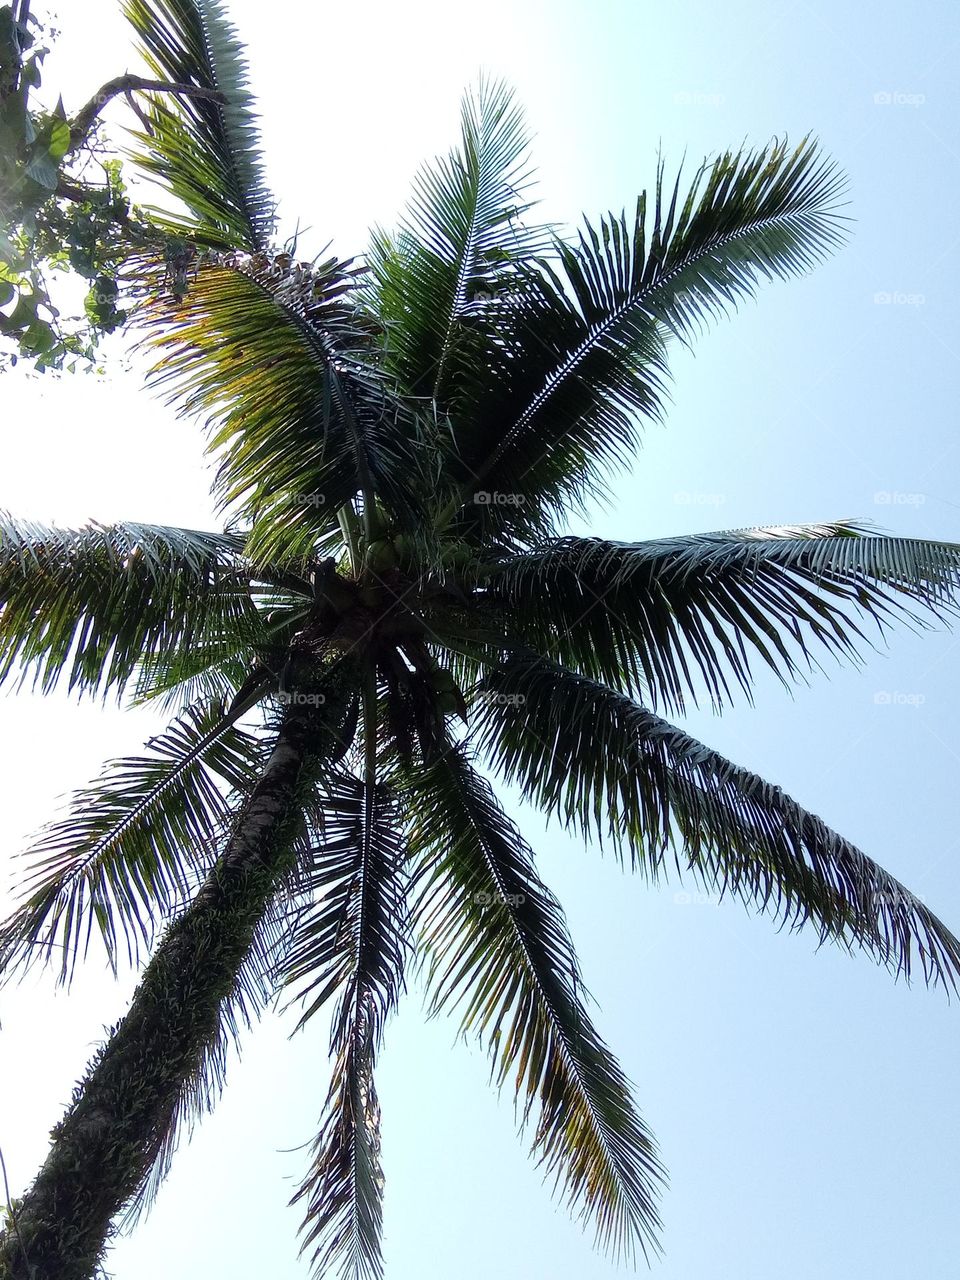 We were strolling along the river side when we pass this coconut tree its leaves creates a beautiful shade during the summer🙂